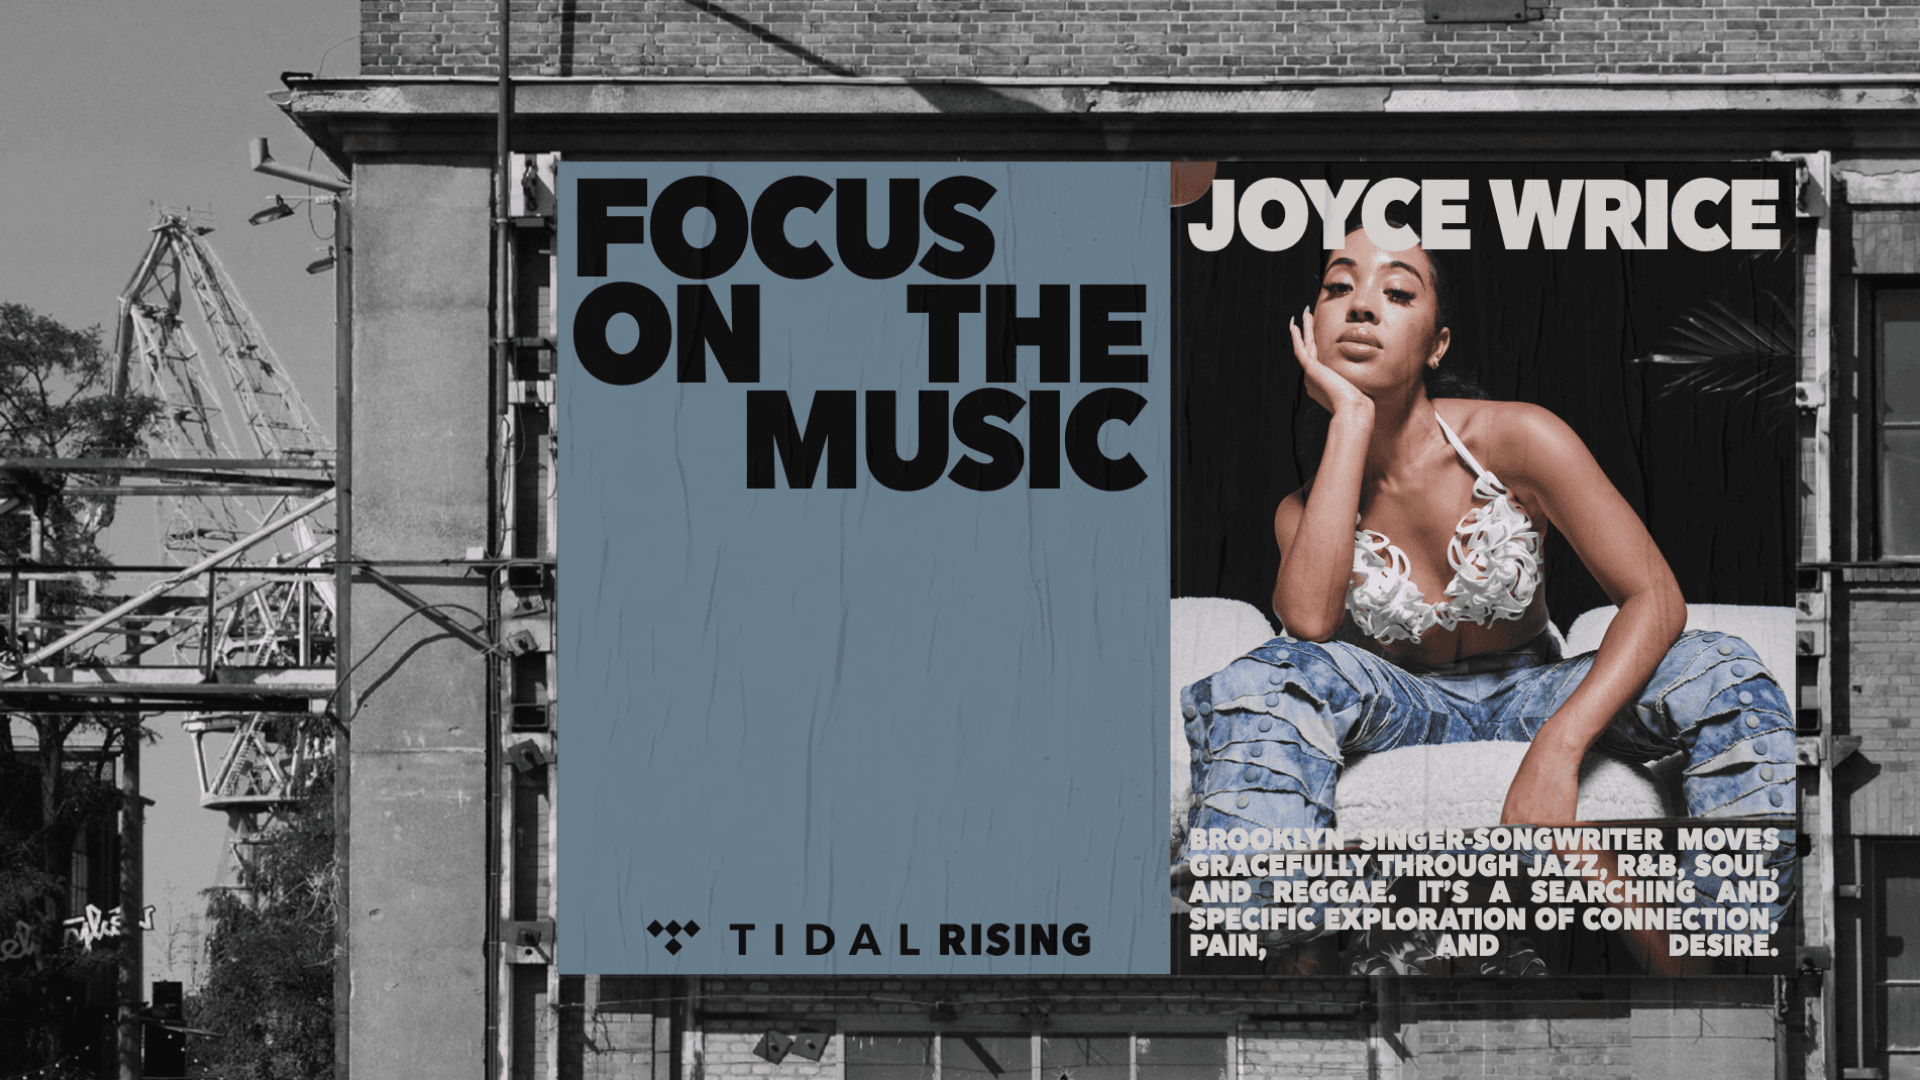 Billboard up on brick building that reads Focus on the Music Tidal Rising. Joyce Wrice sitting on couch with text Brooklyn singer-songwriter moves gracefully through jazz, r&b, soul and reggae. It's a searching and specific exploration of connection, pain, and desire.